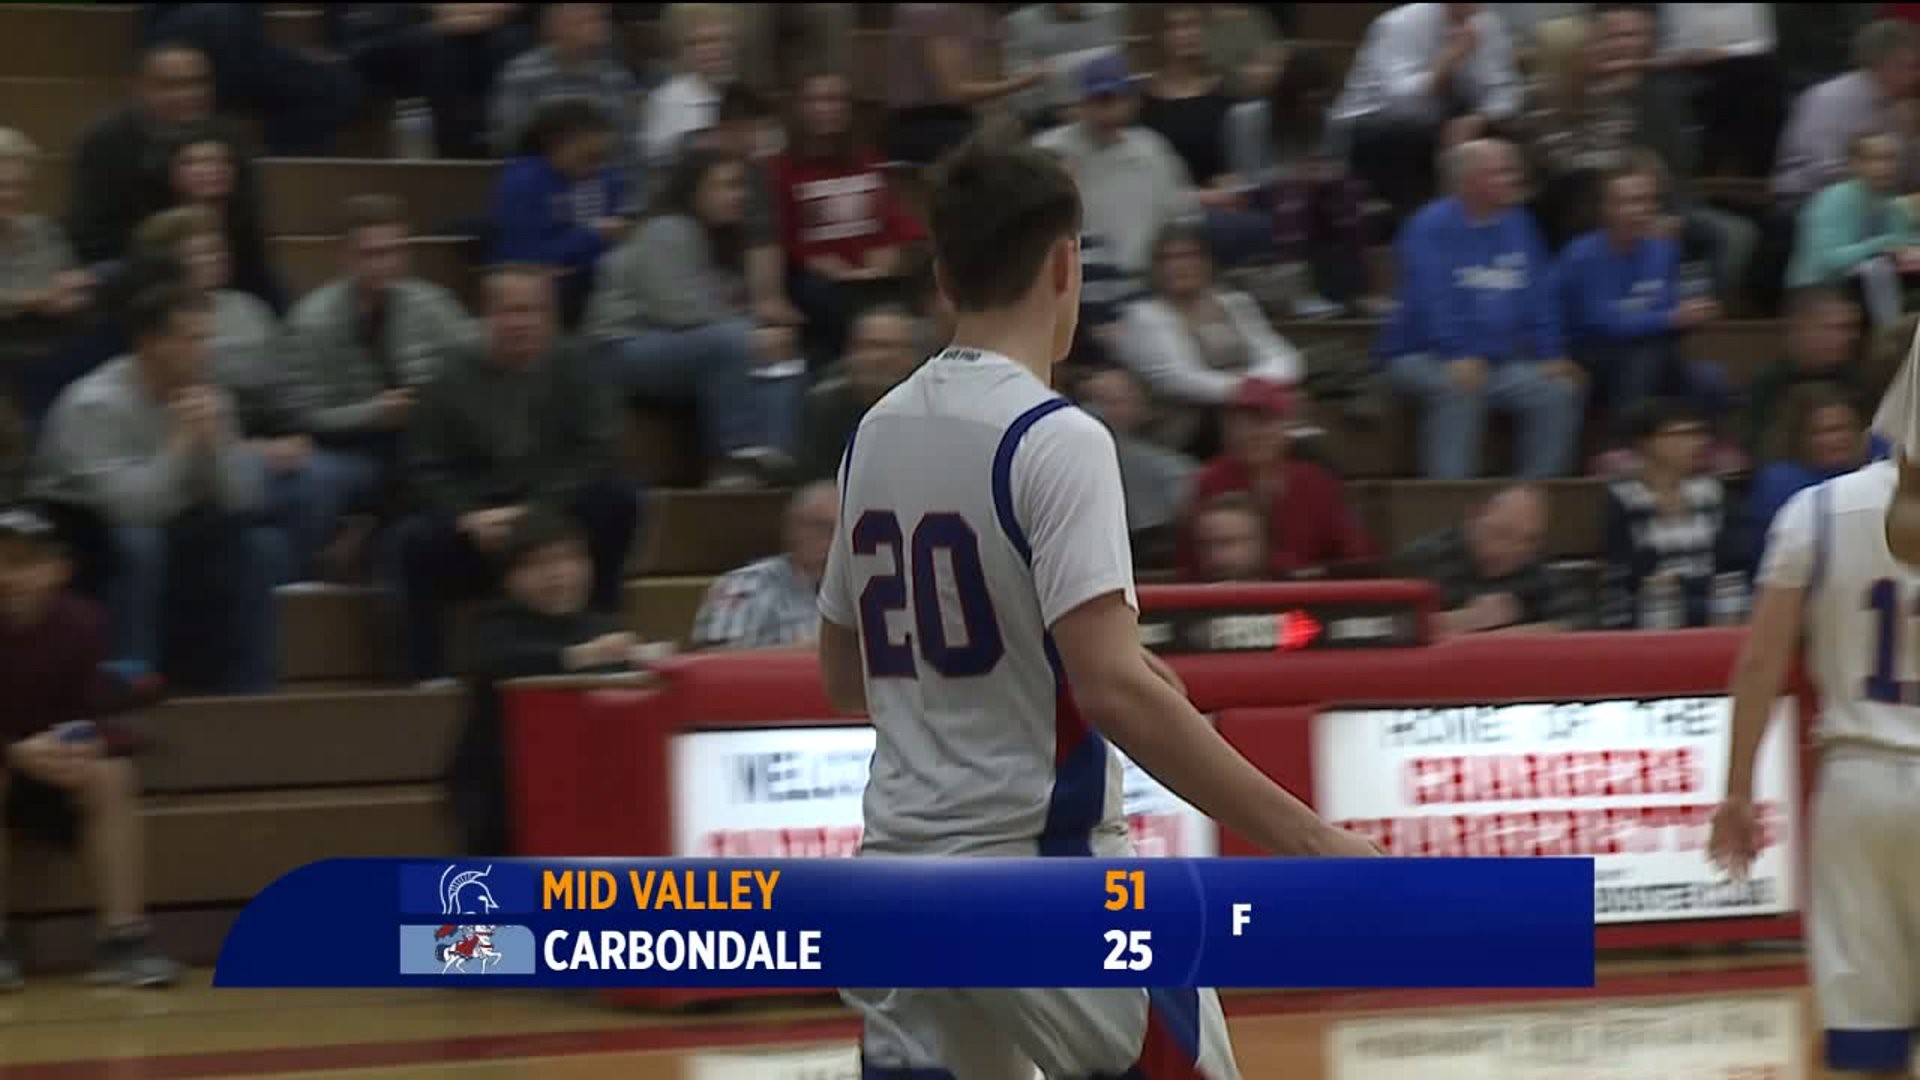 Mid Valley vs Carbondale basketball